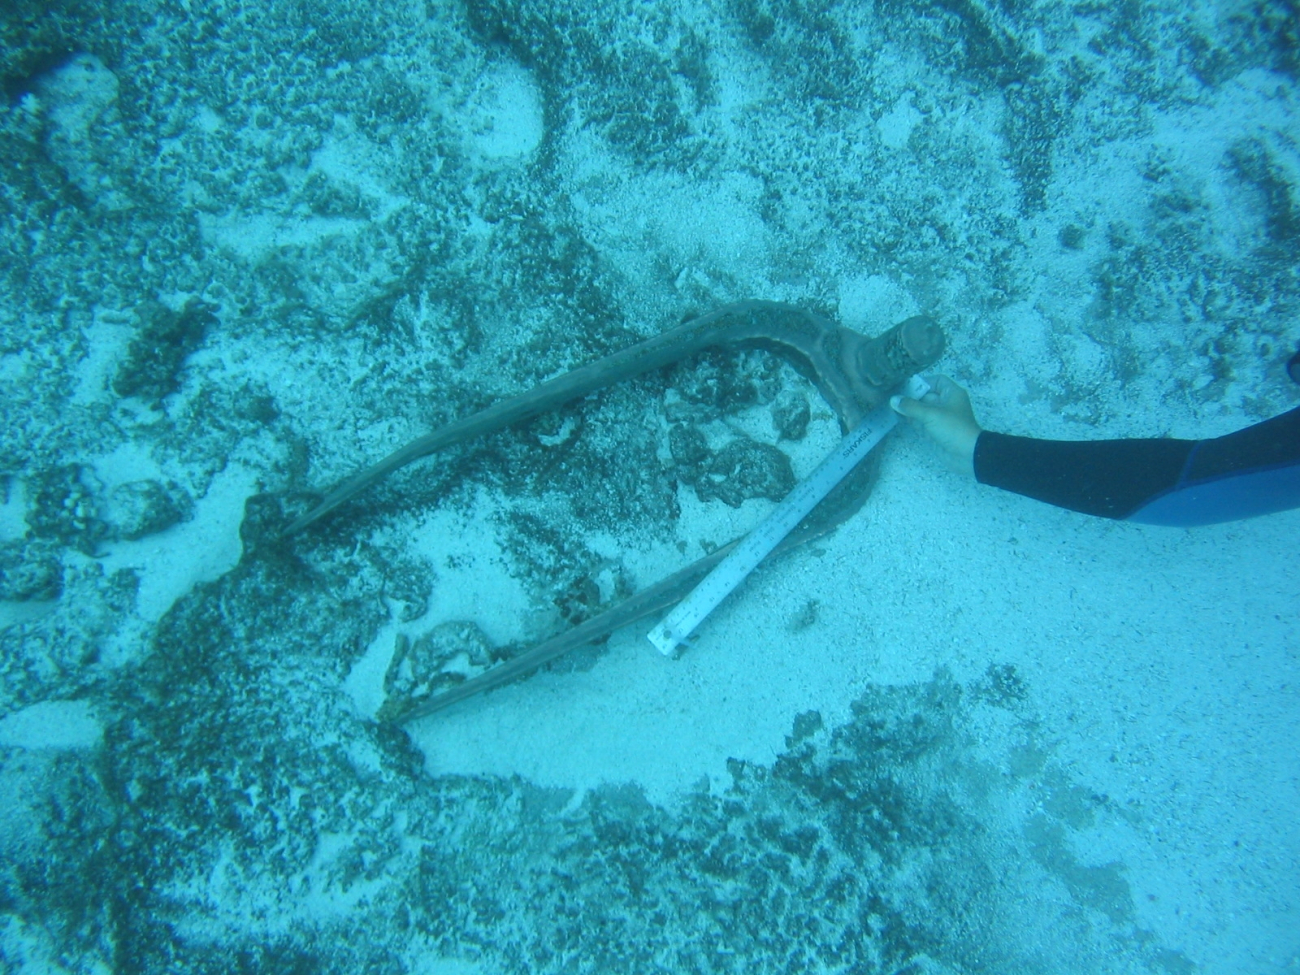 Pintle from early Nineteenth Century whaling vessel on Pearl and Hermes Reef